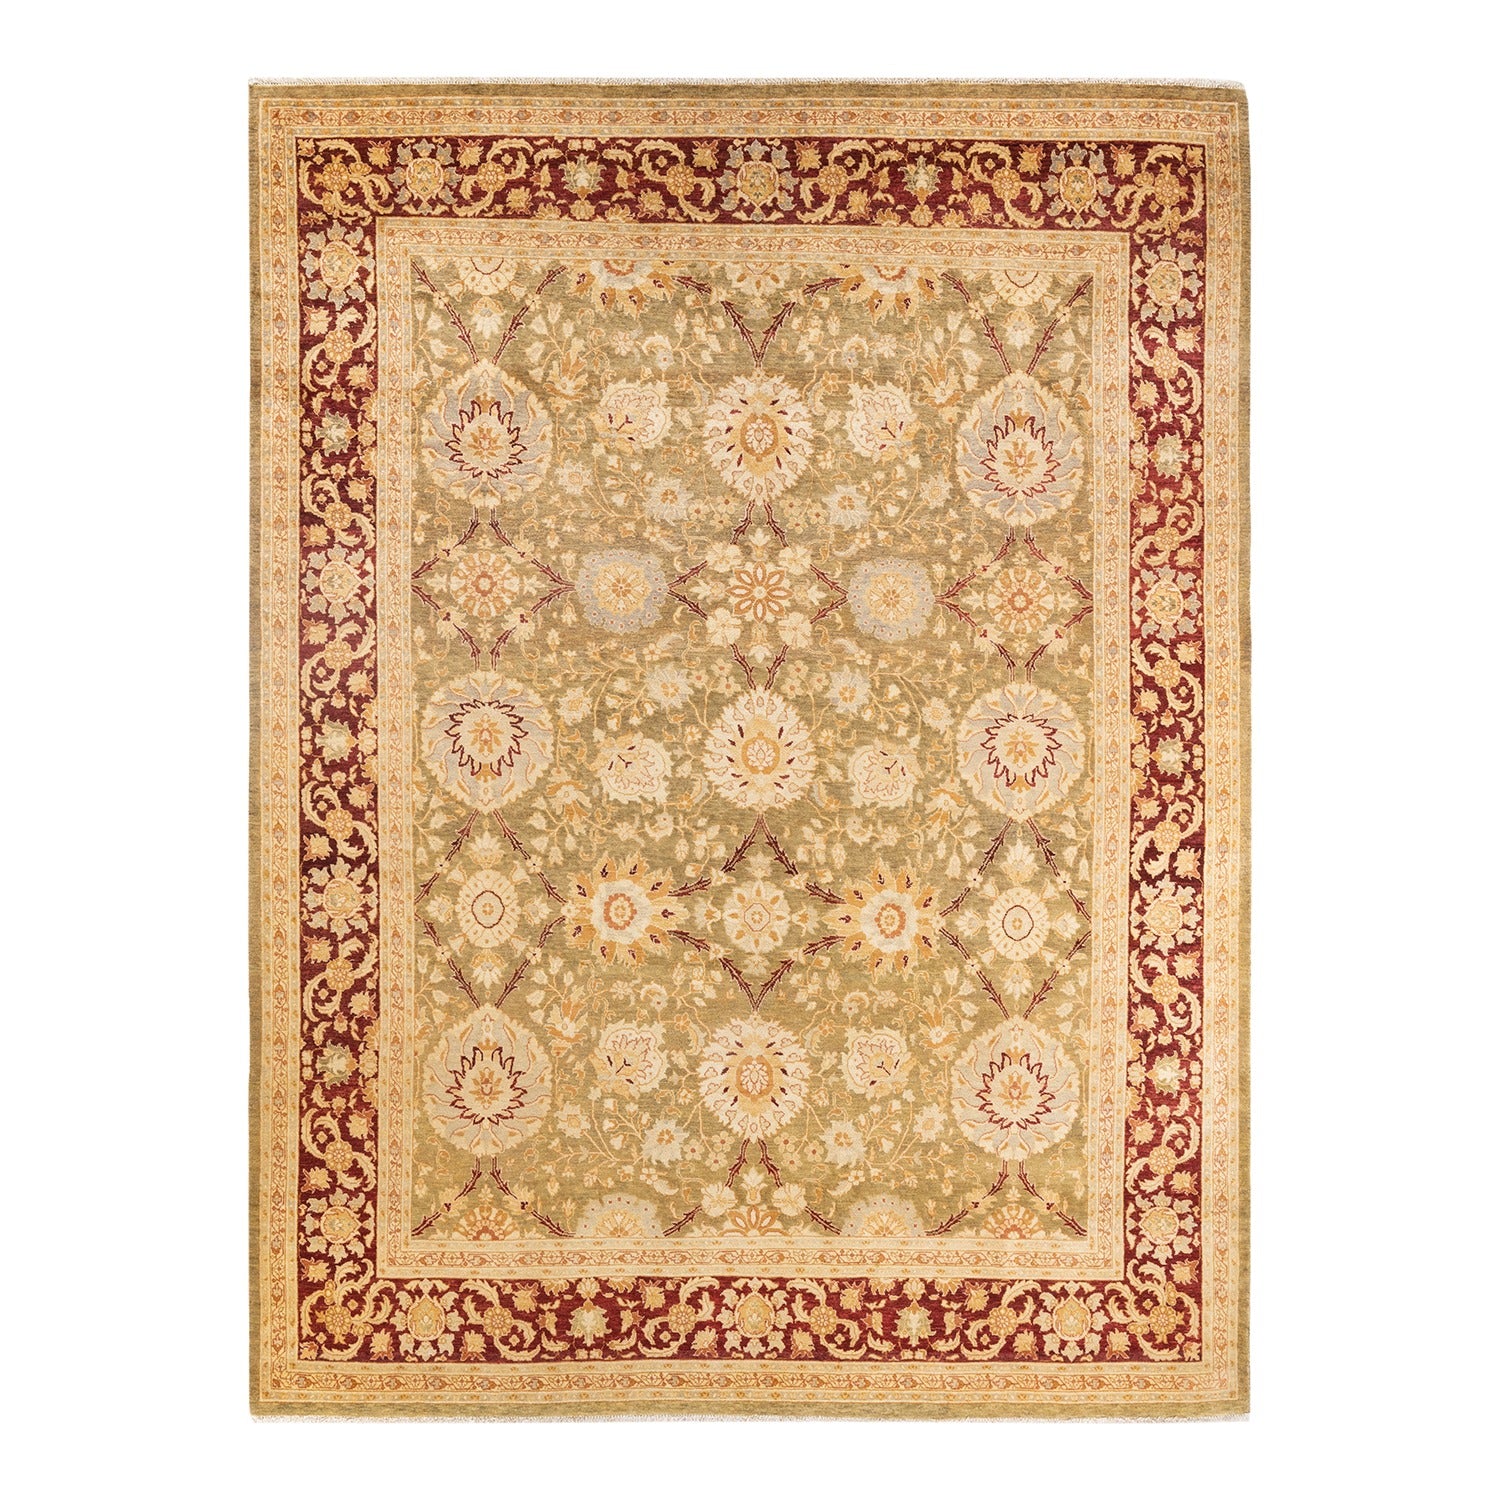 Exquisite rectangular area rug showcases intricate patterns and luxurious design.